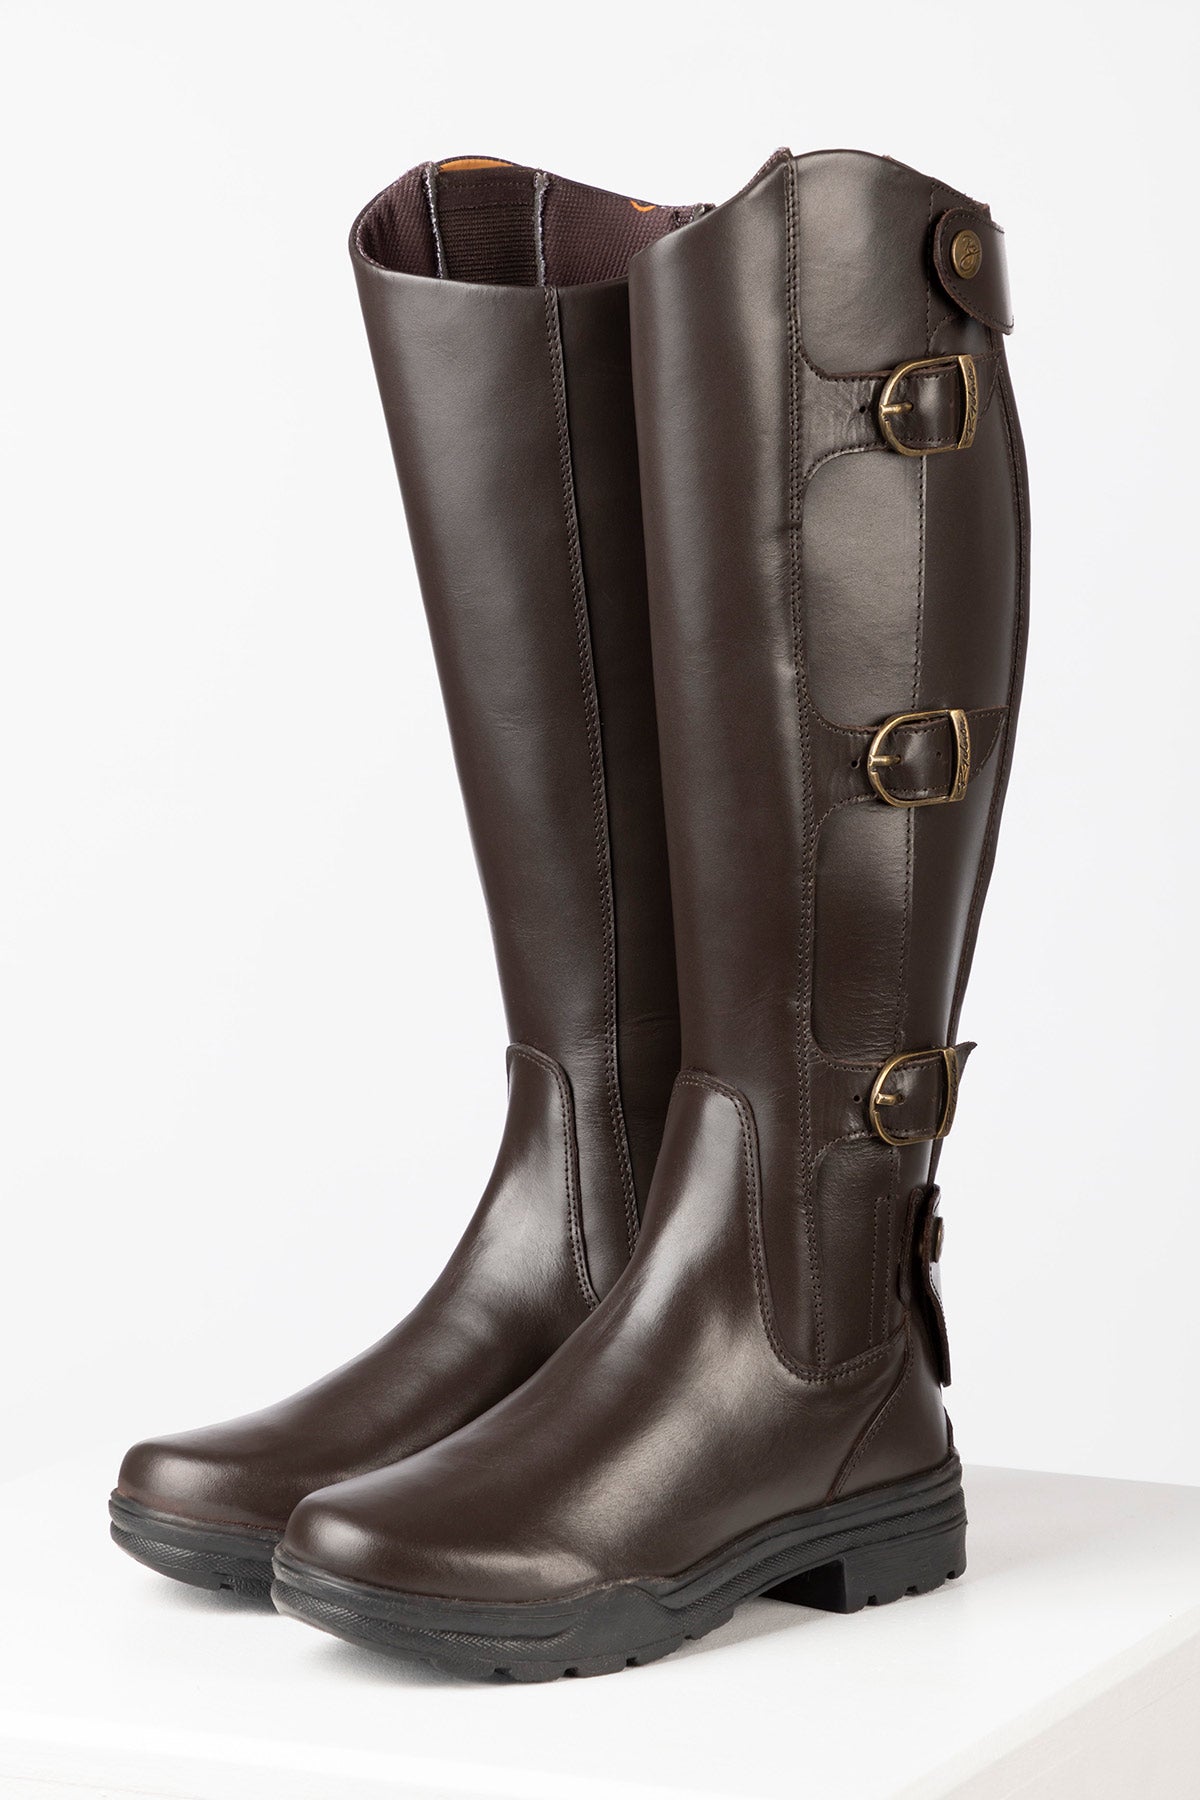 Ladies Long Riding Boots UK | Womens Leather Riding Boots | Rydale